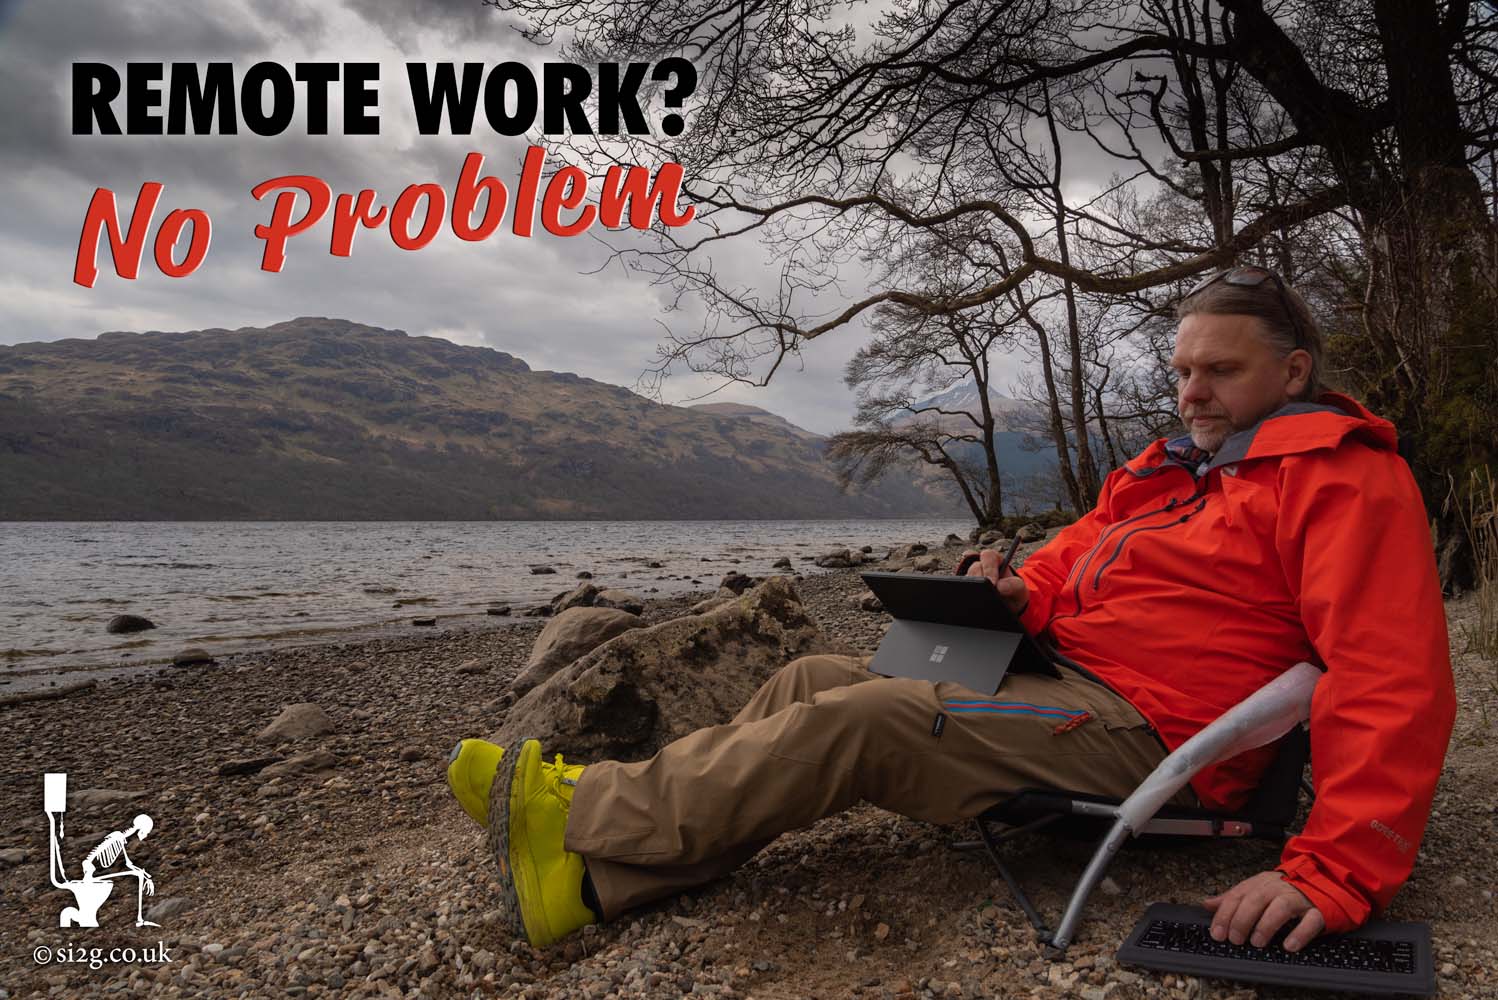 Still No Problem - To demonstrate the ease of remote work I visit Loch Lomond for a spot of photoshop work.